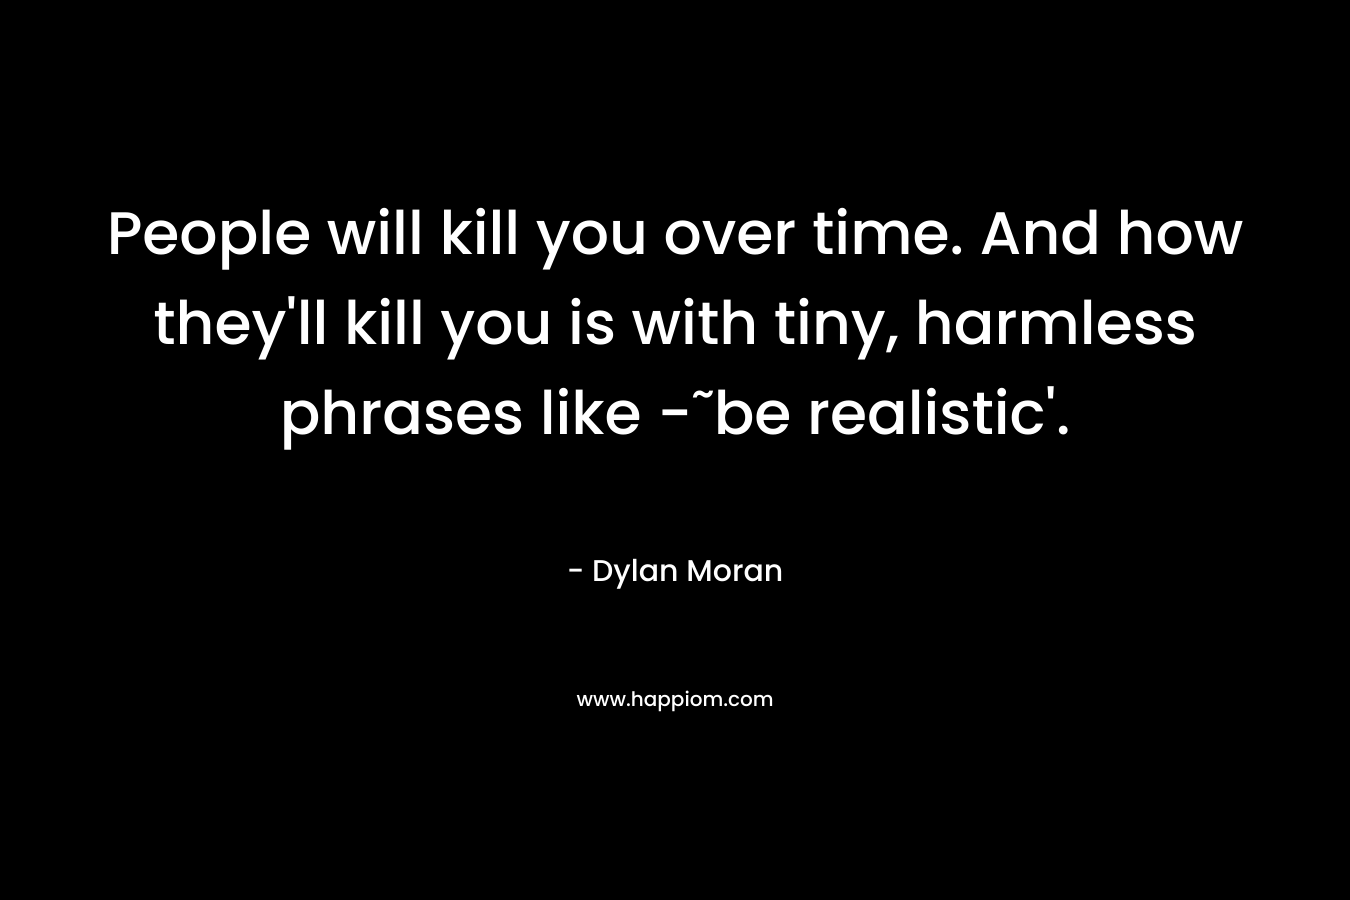 People will kill you over time. And how they'll kill you is with tiny, harmless phrases like -˜be realistic'.